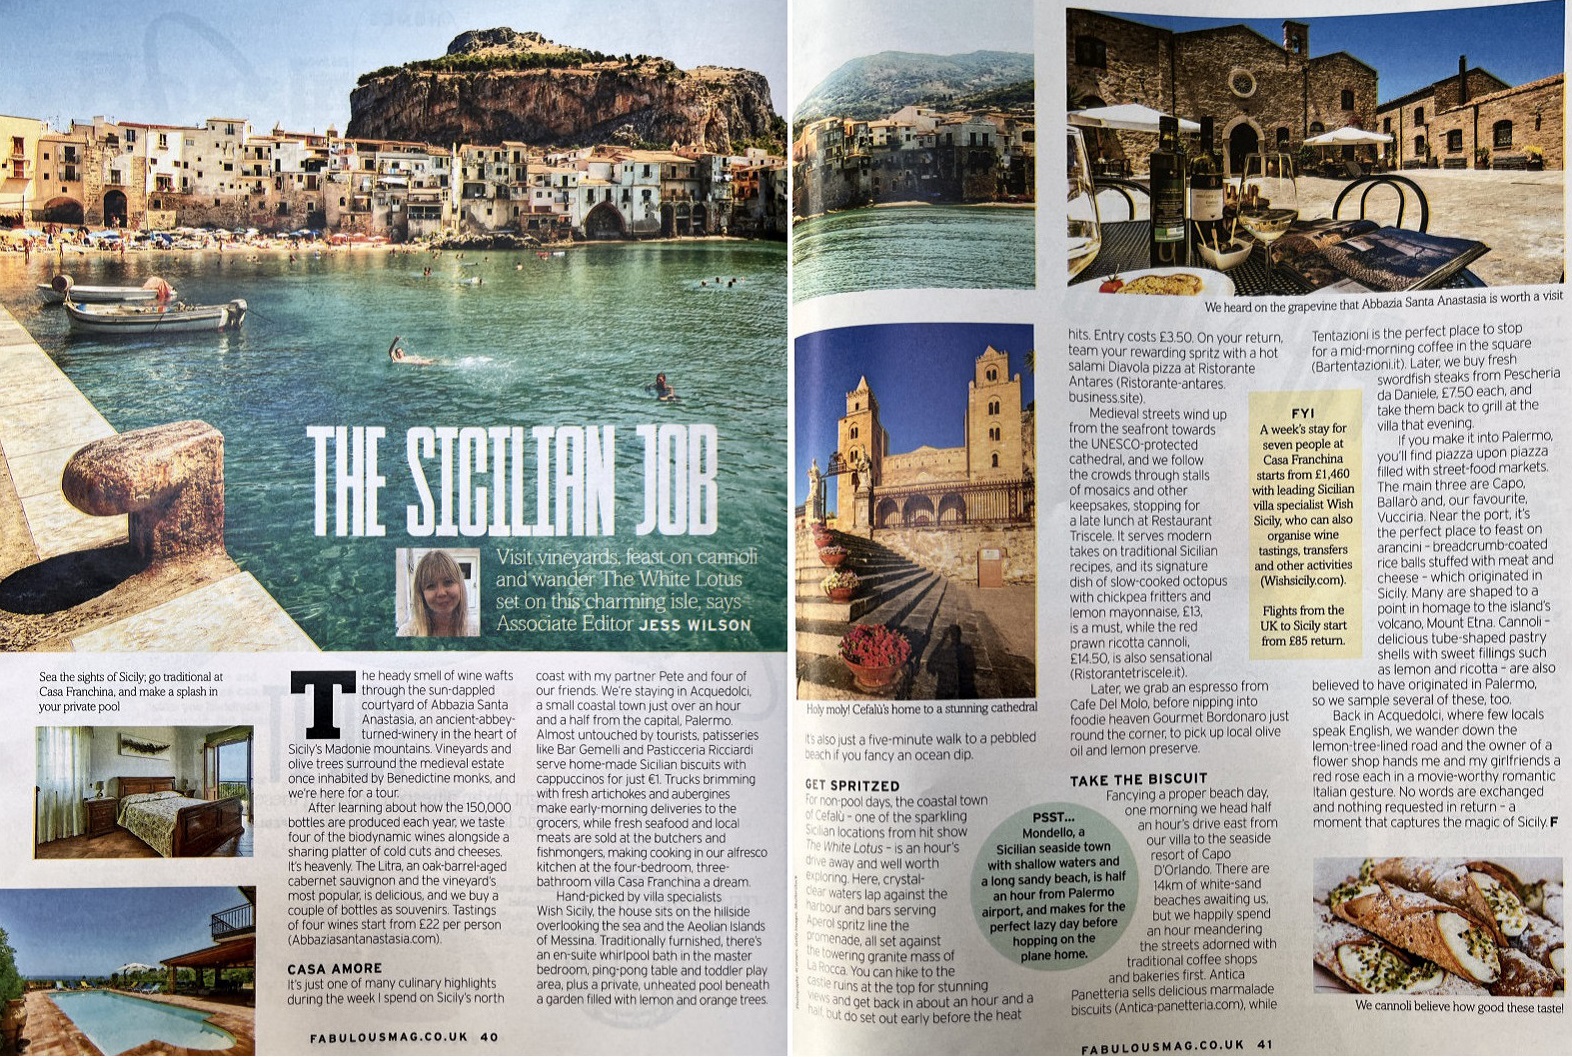 Read the full article online: https://www.thesun.co.uk/travel/22928348/vineyards-cannoli-wander-white-lotus-set-charming-sicily/